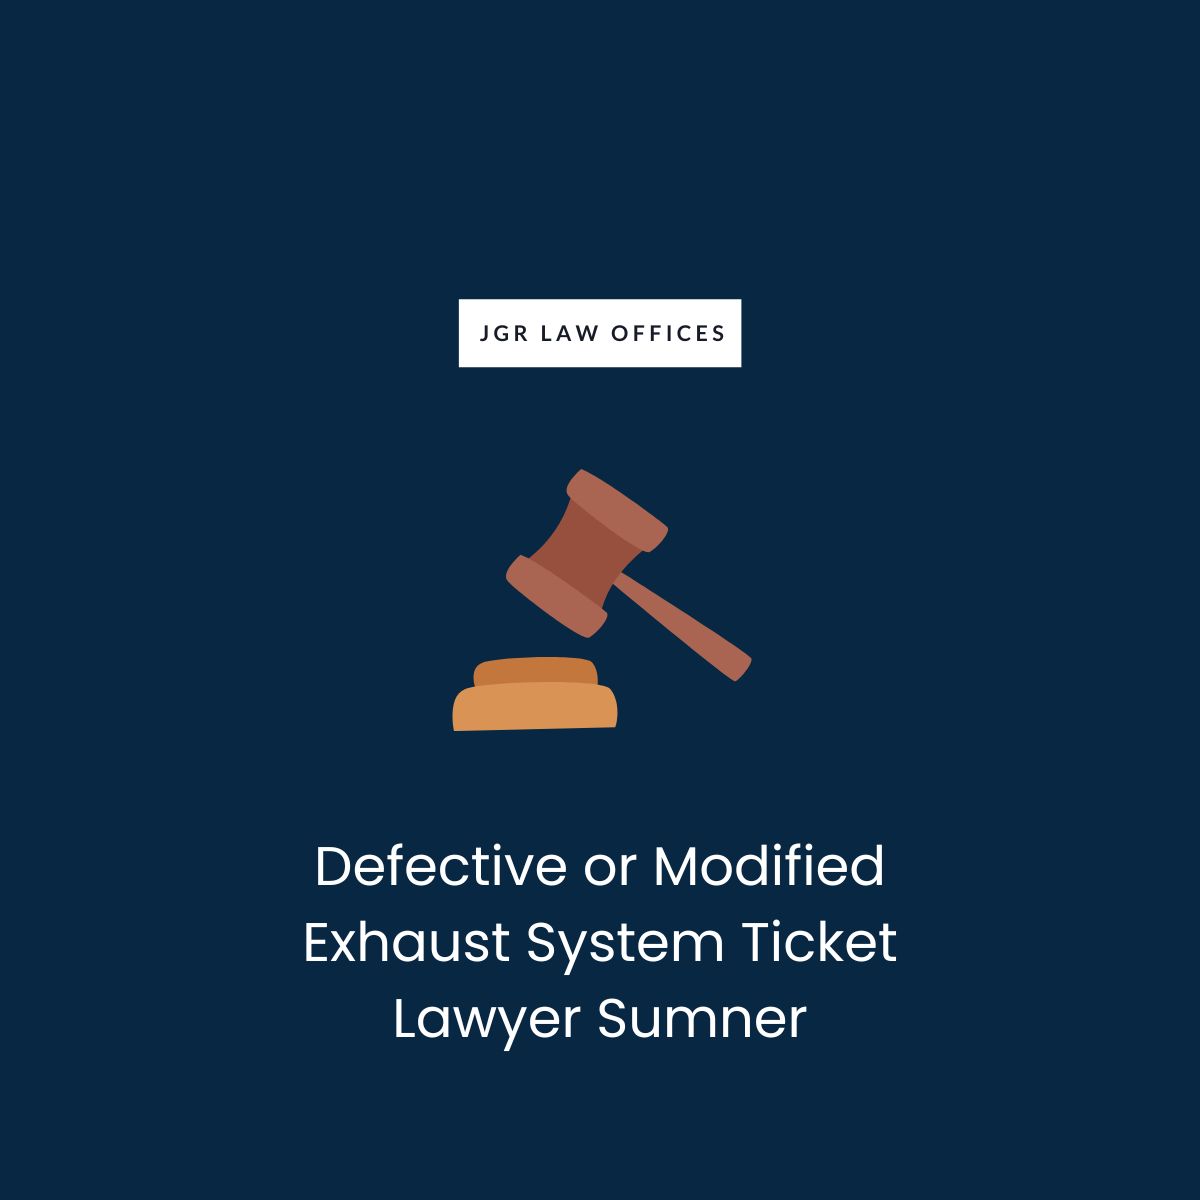 Defective or Modified Exhaust System Ticket Attorney Sumner